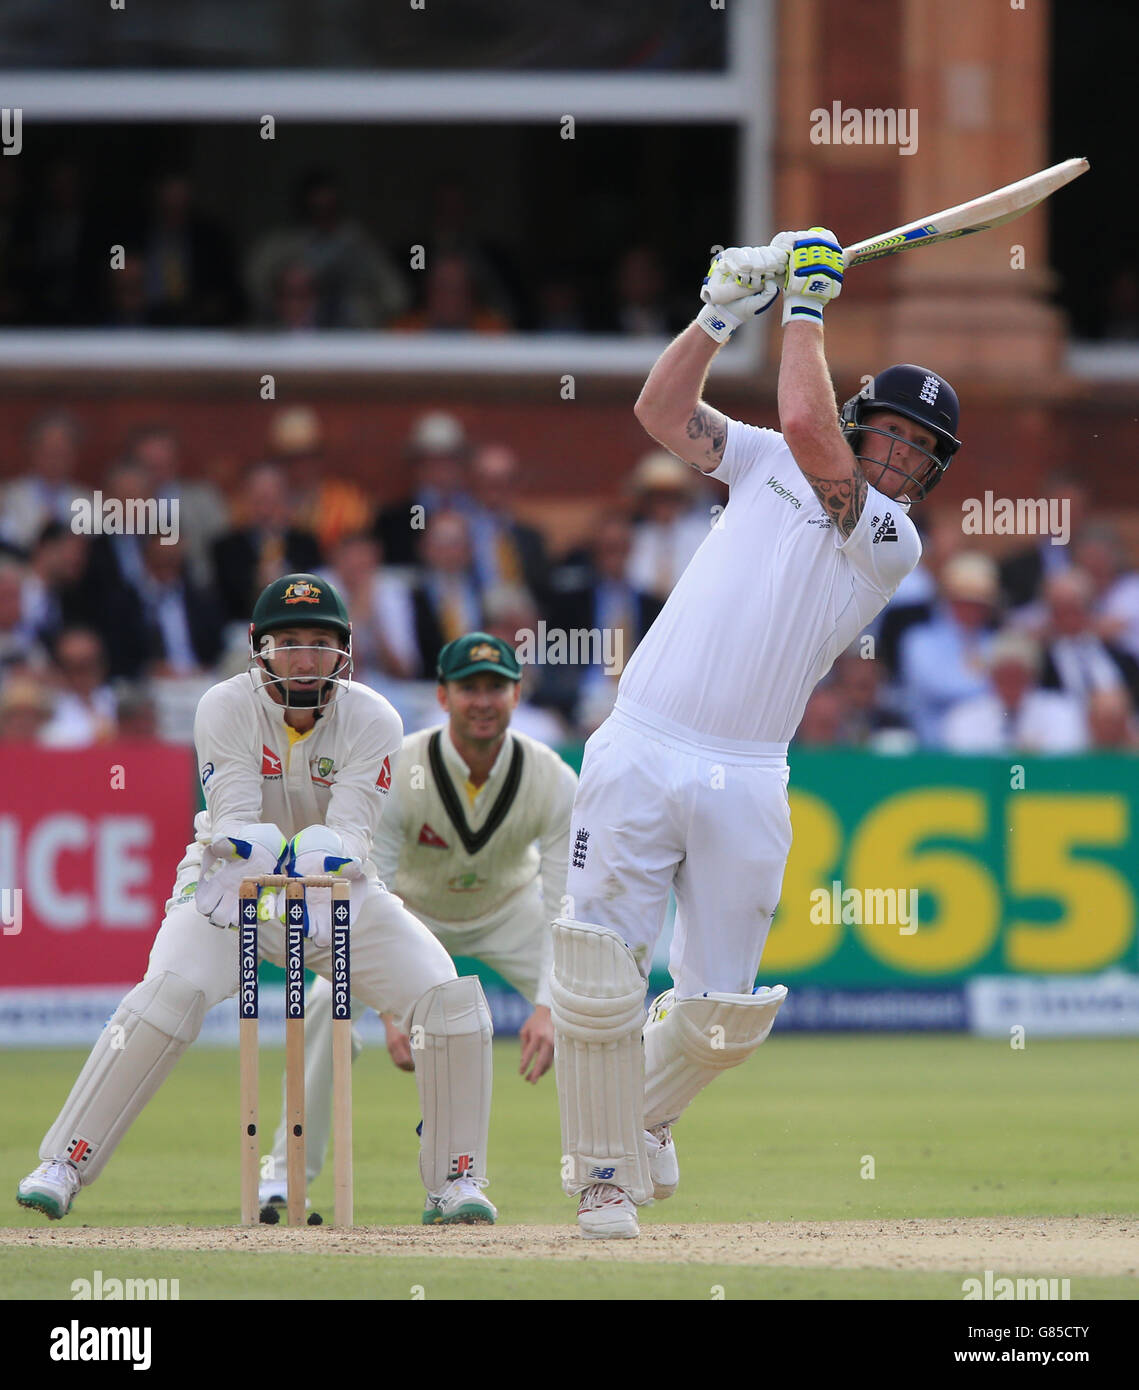 Cricket - Second Investec Ashes Test - England v Australia - Day Two - Lord's. England batsman Ben Stokes hits a six off Australia bowler Nathan Lyon during day two of the Second Investec Ashes Test at Lord's, London . Stock Photo